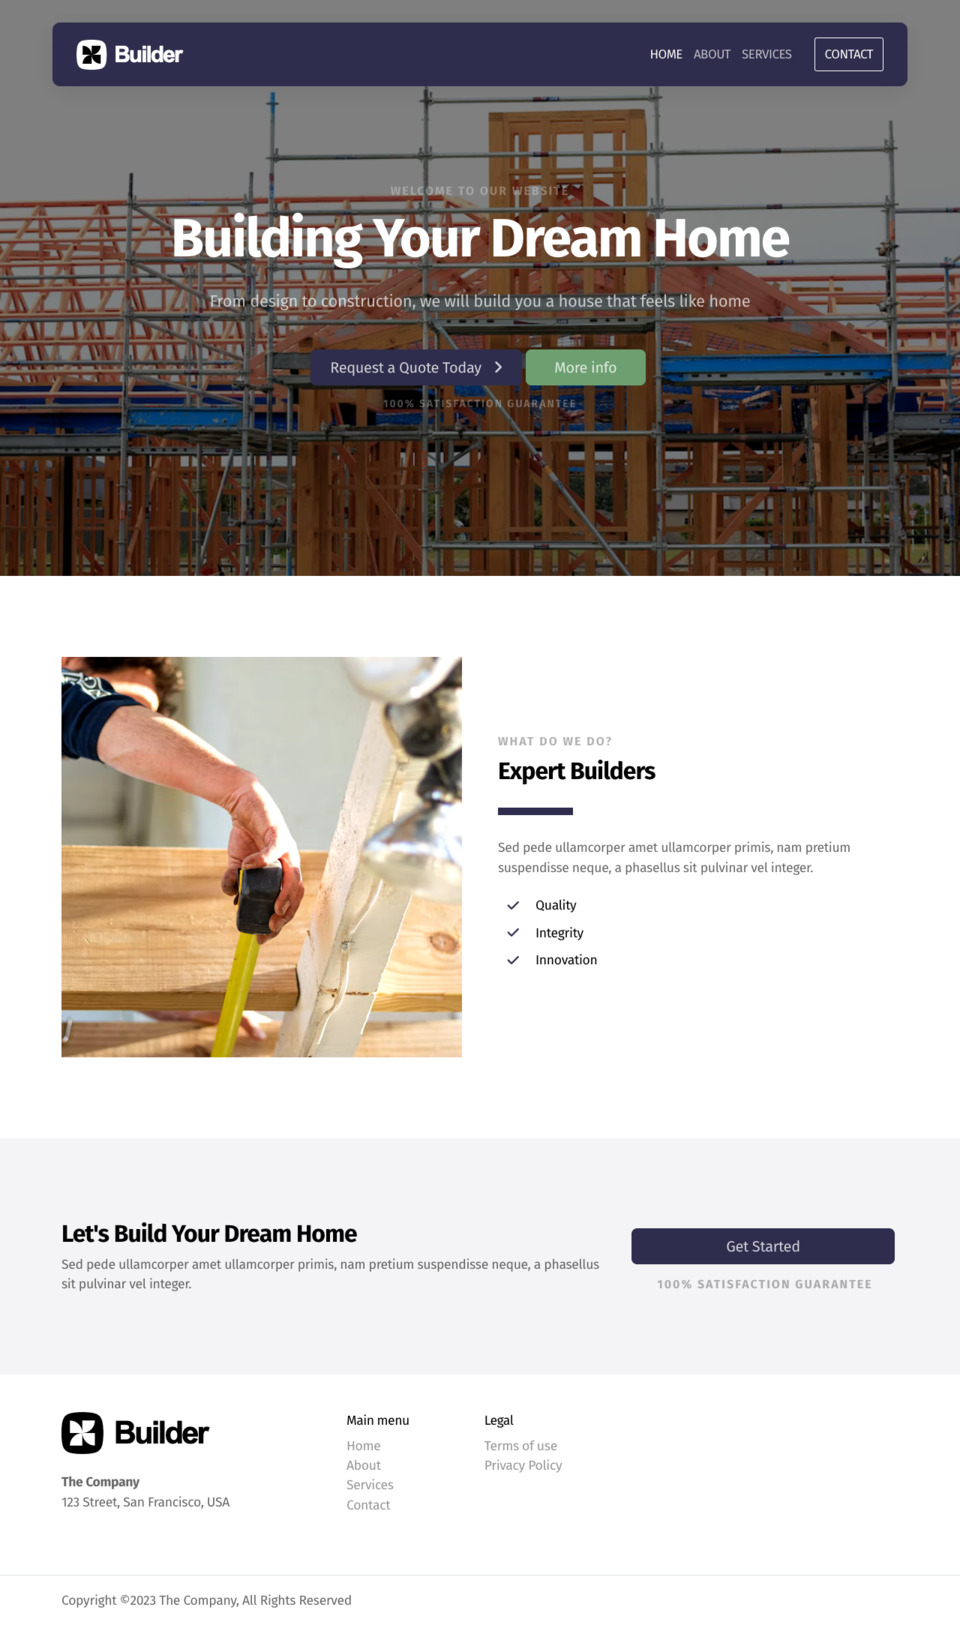 Builder Website Template - Ideal for home builders, construction companies, architects, and general contractors looking to create a professional online presence.